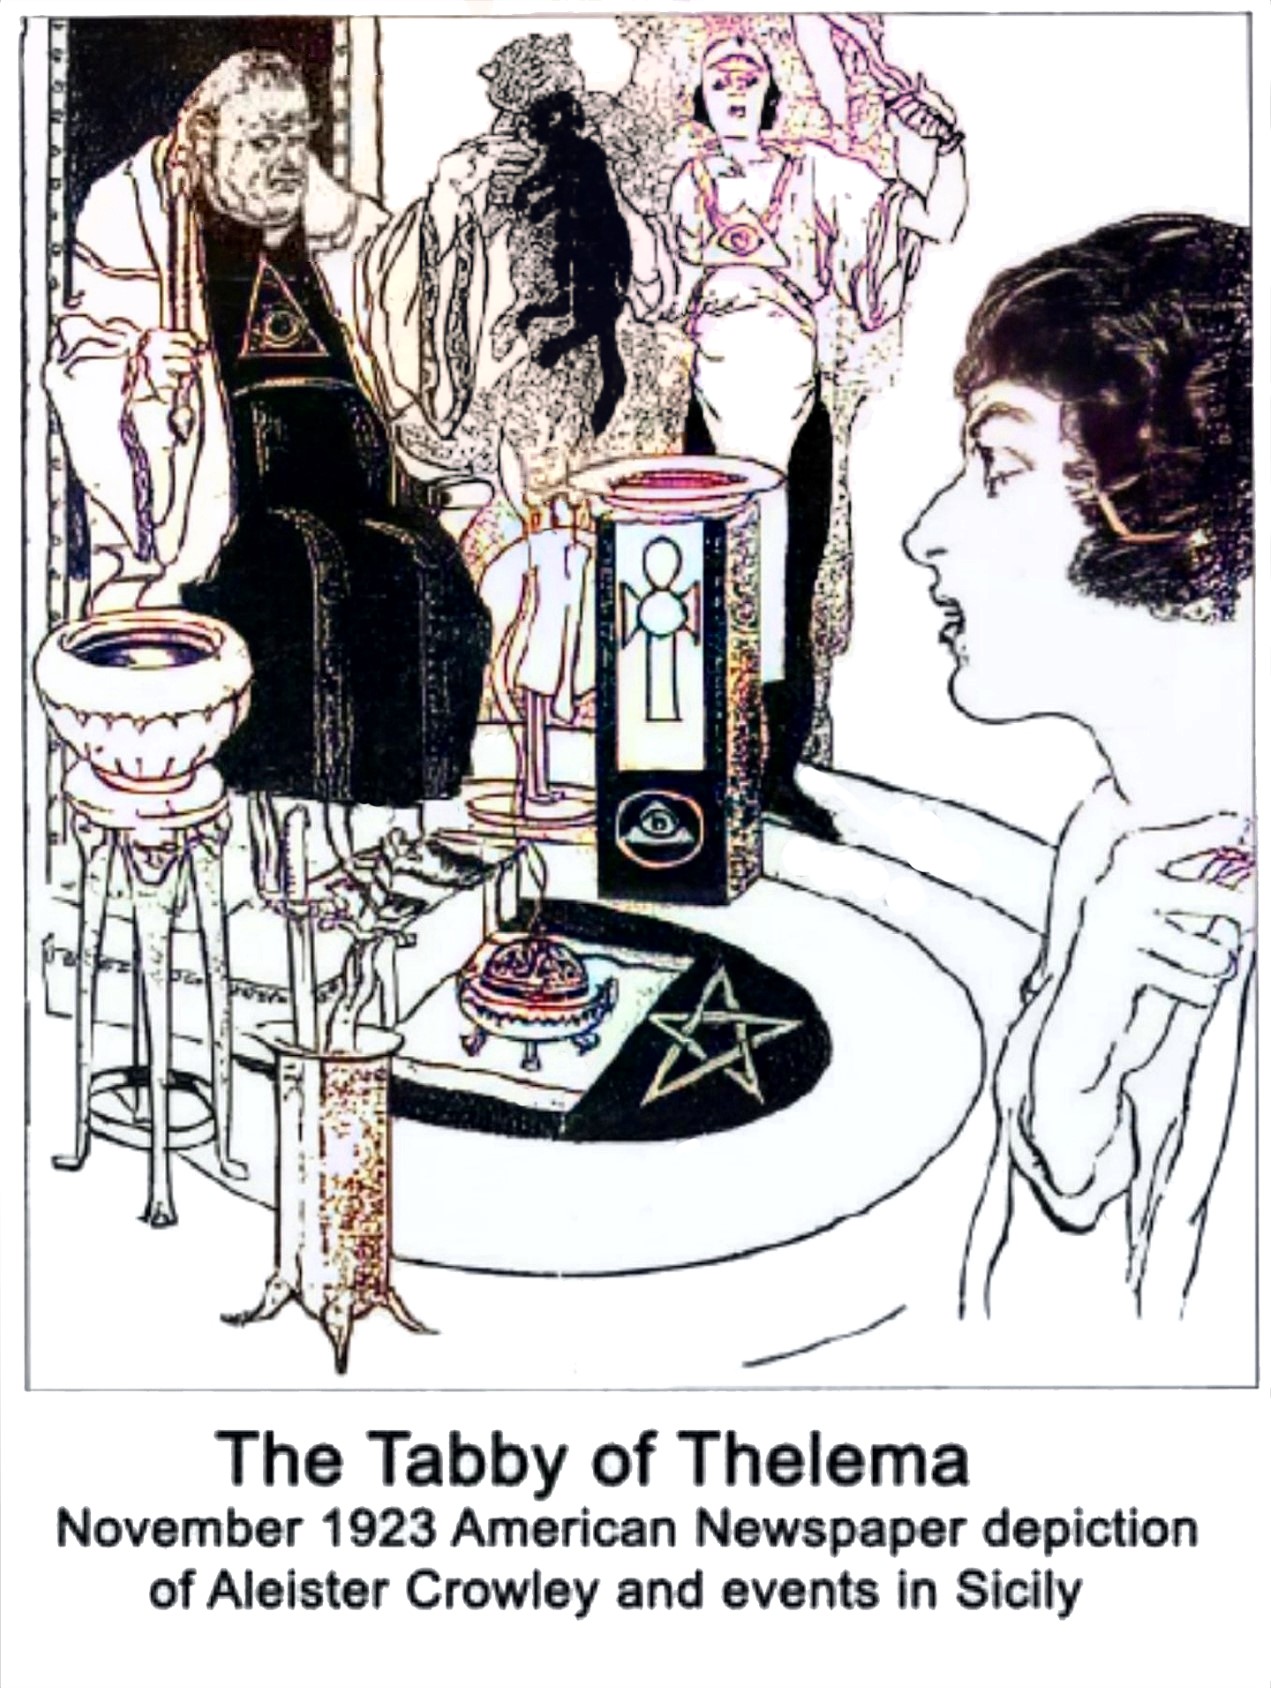 The Tabby of Thelema — Aleister Crowley and events in Sicily